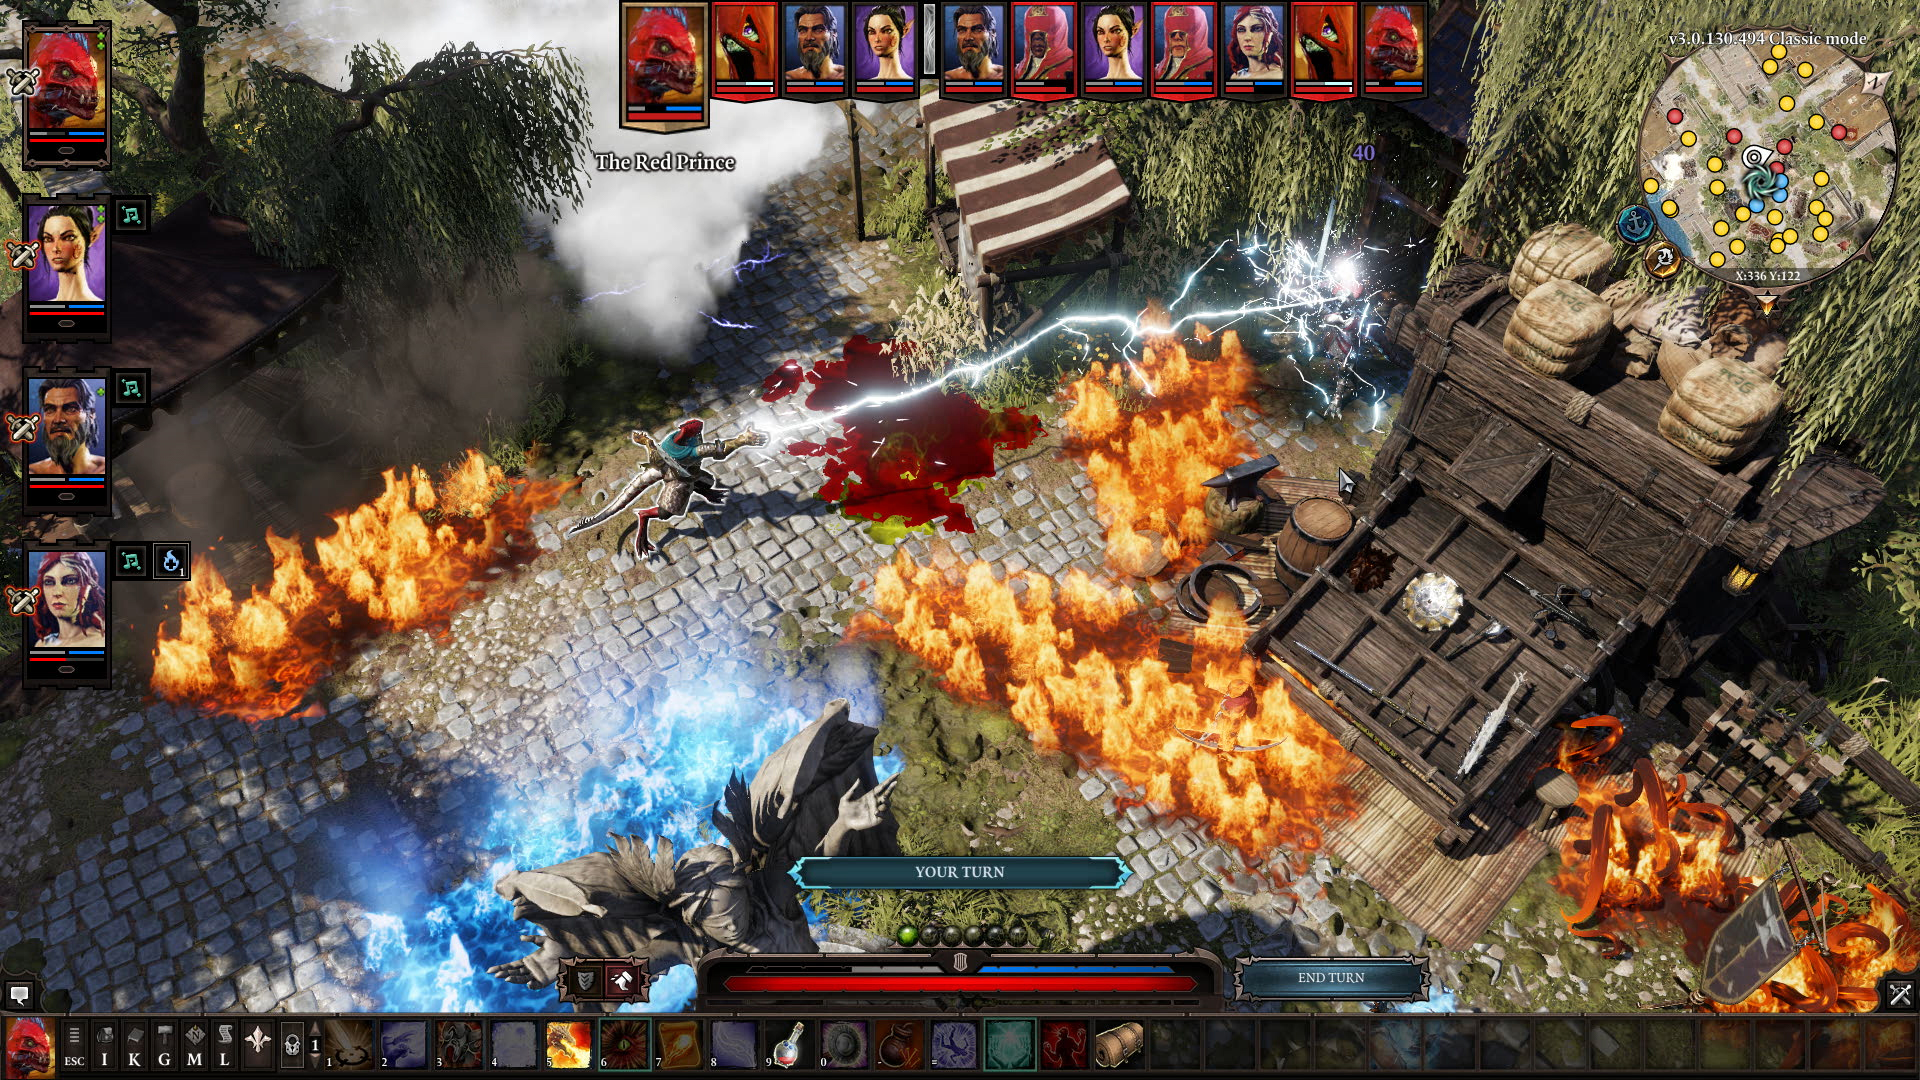 A character unleashes a lightning attack surrounded by fire in Divinity: Original Sin 2